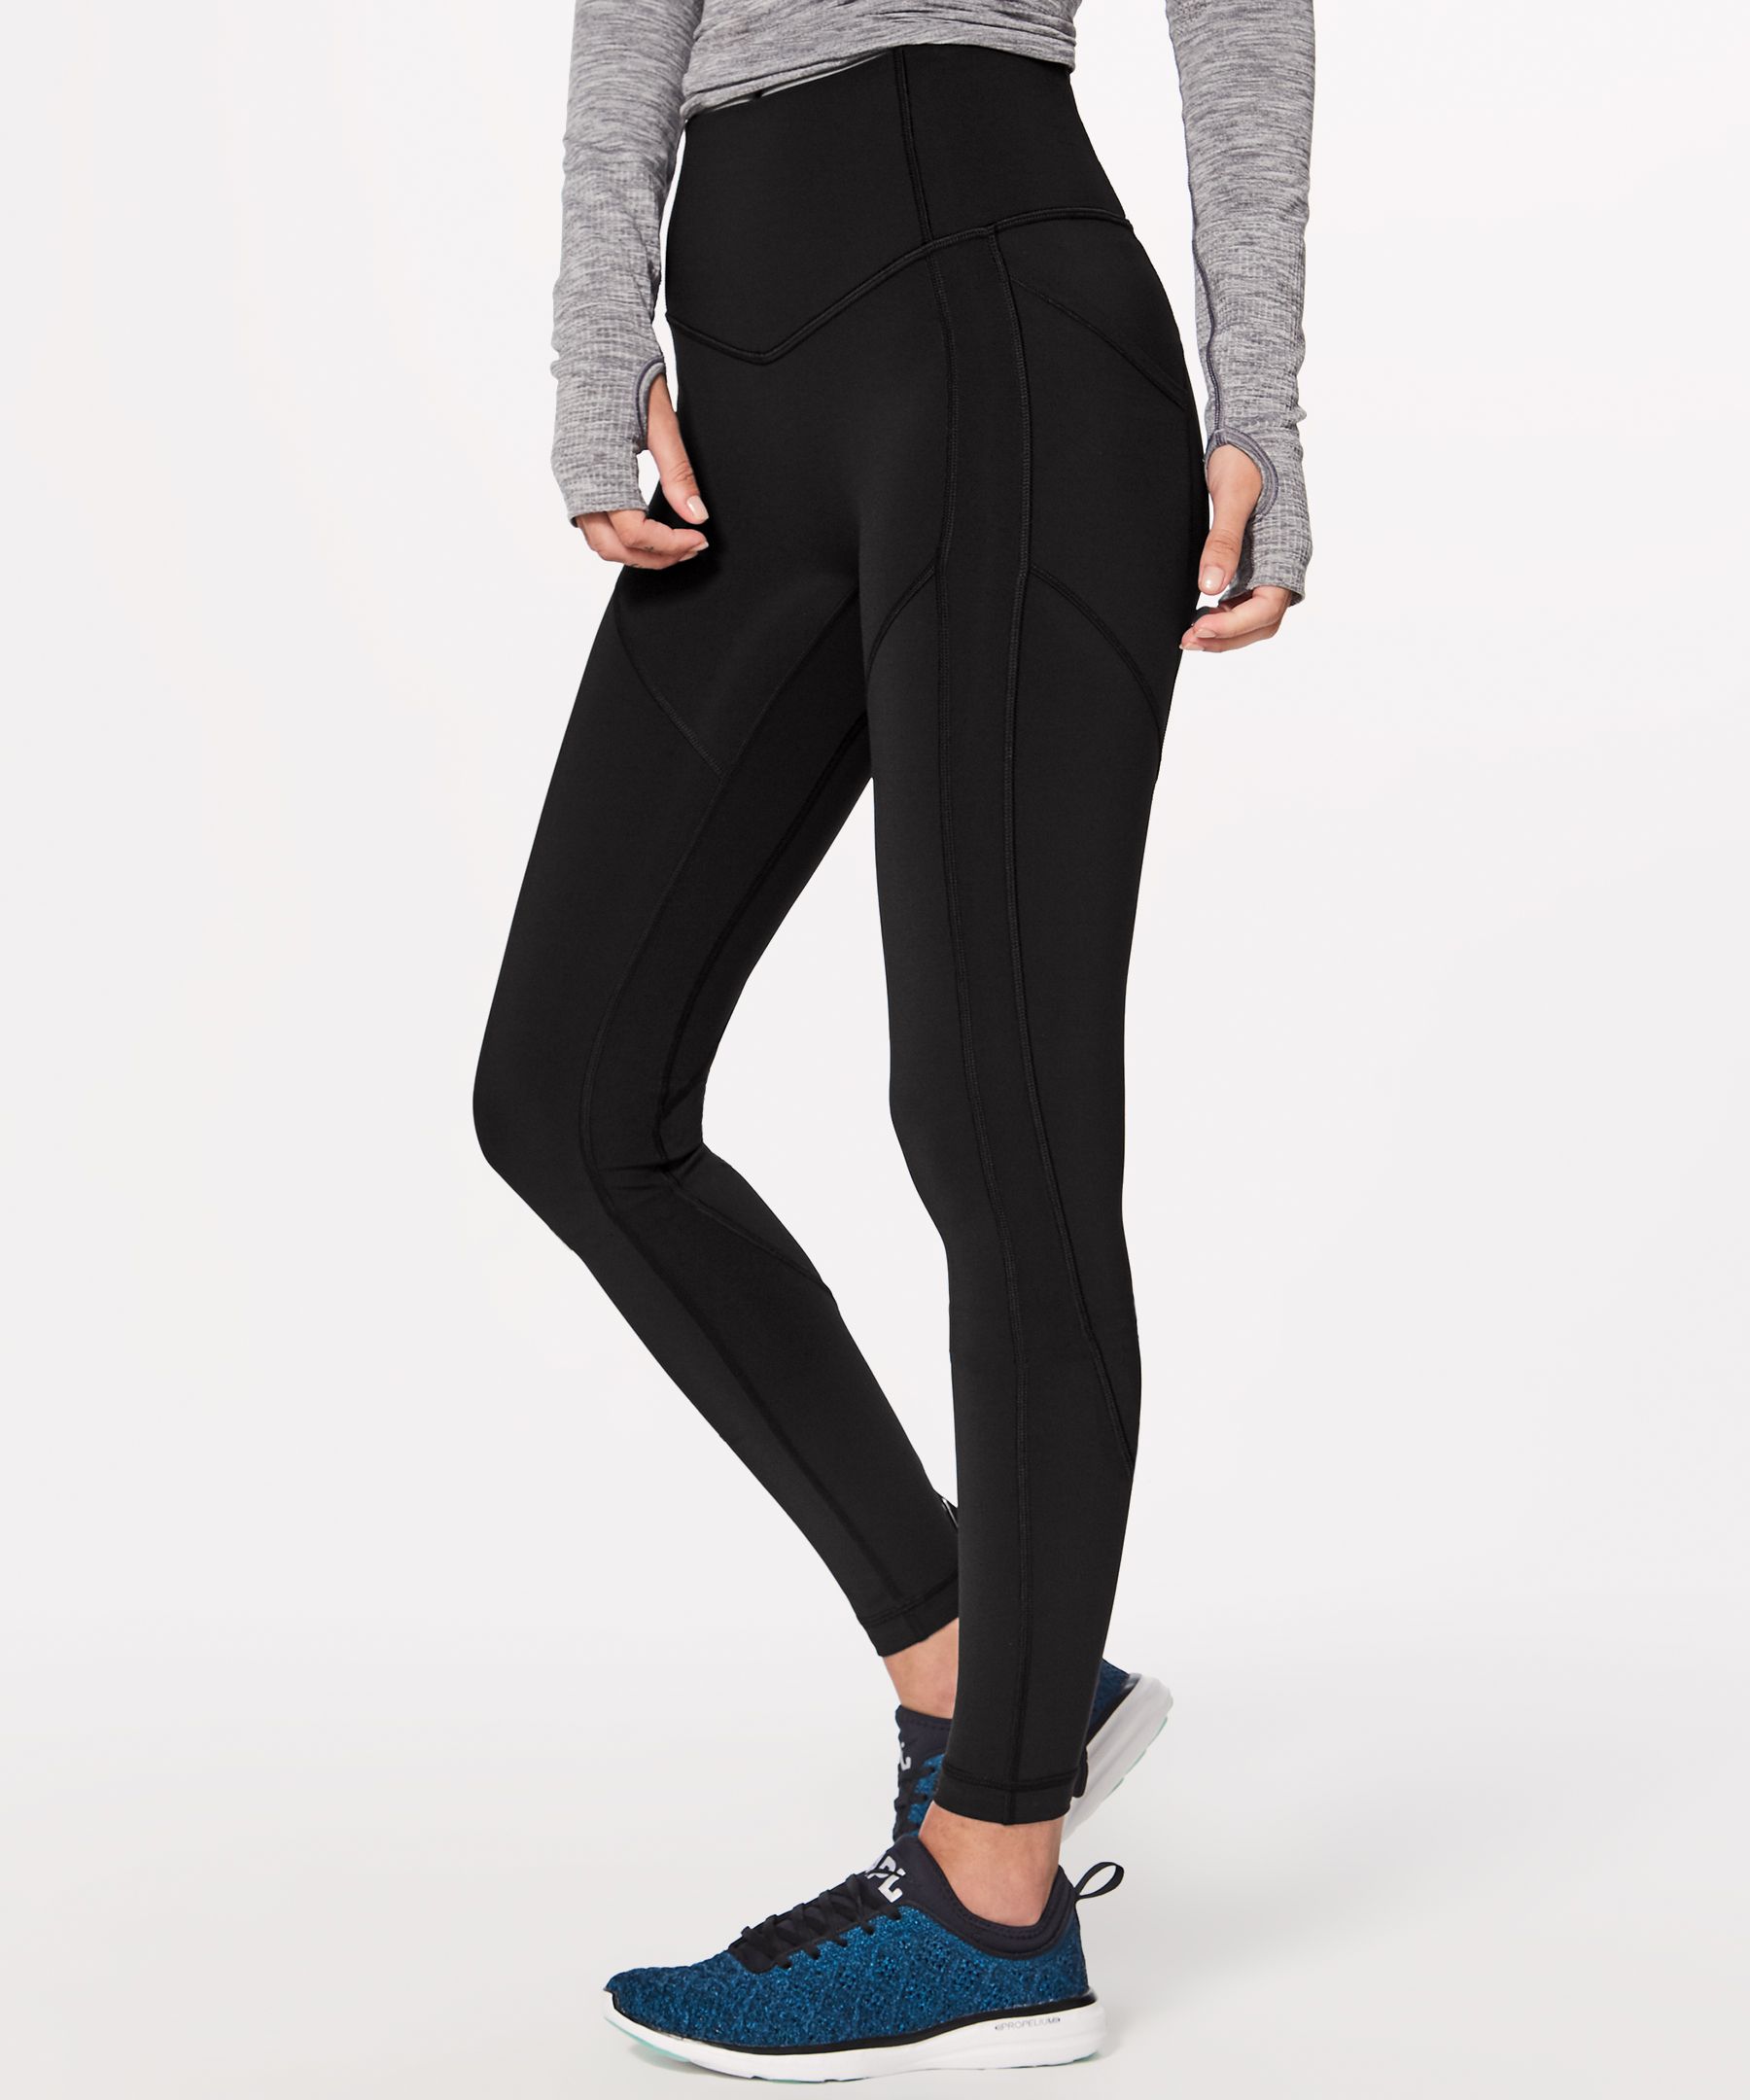 Lululemon Athletica Women's Pants  International Society of Precision  Agriculture